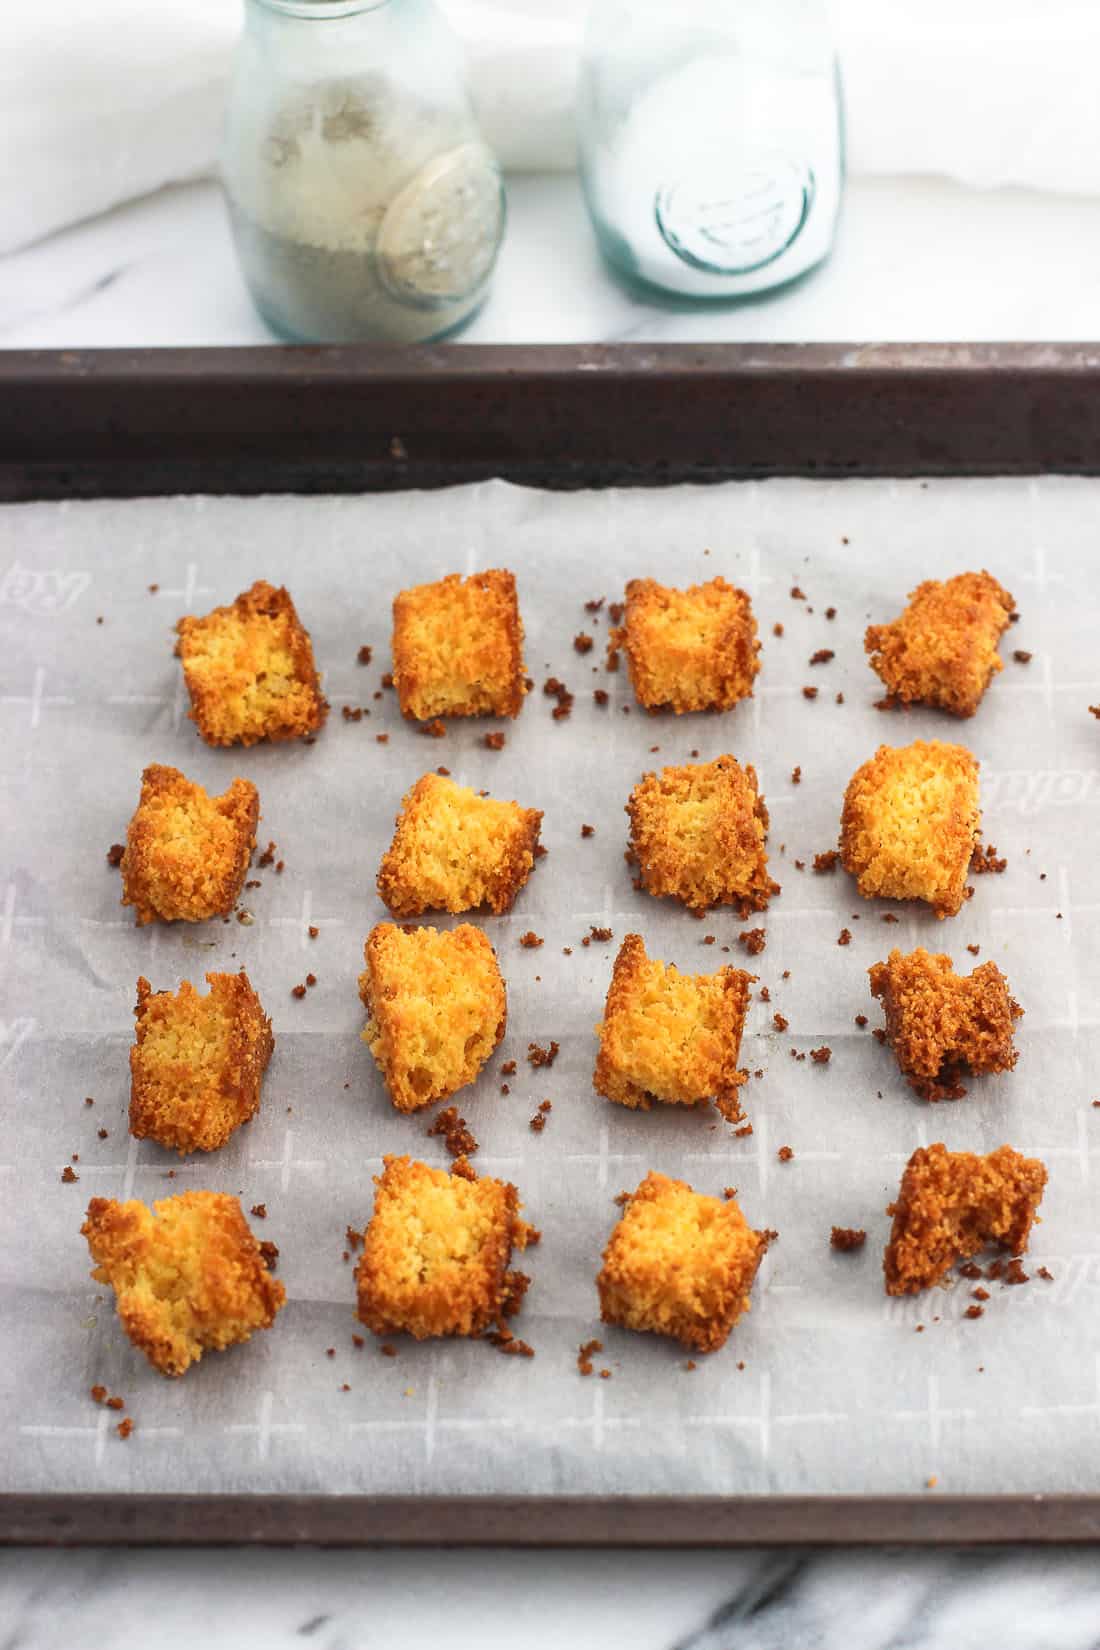 Sixteen cornbread croutons on a parchment-lined baking sheet with salt and pepper shakers in the background